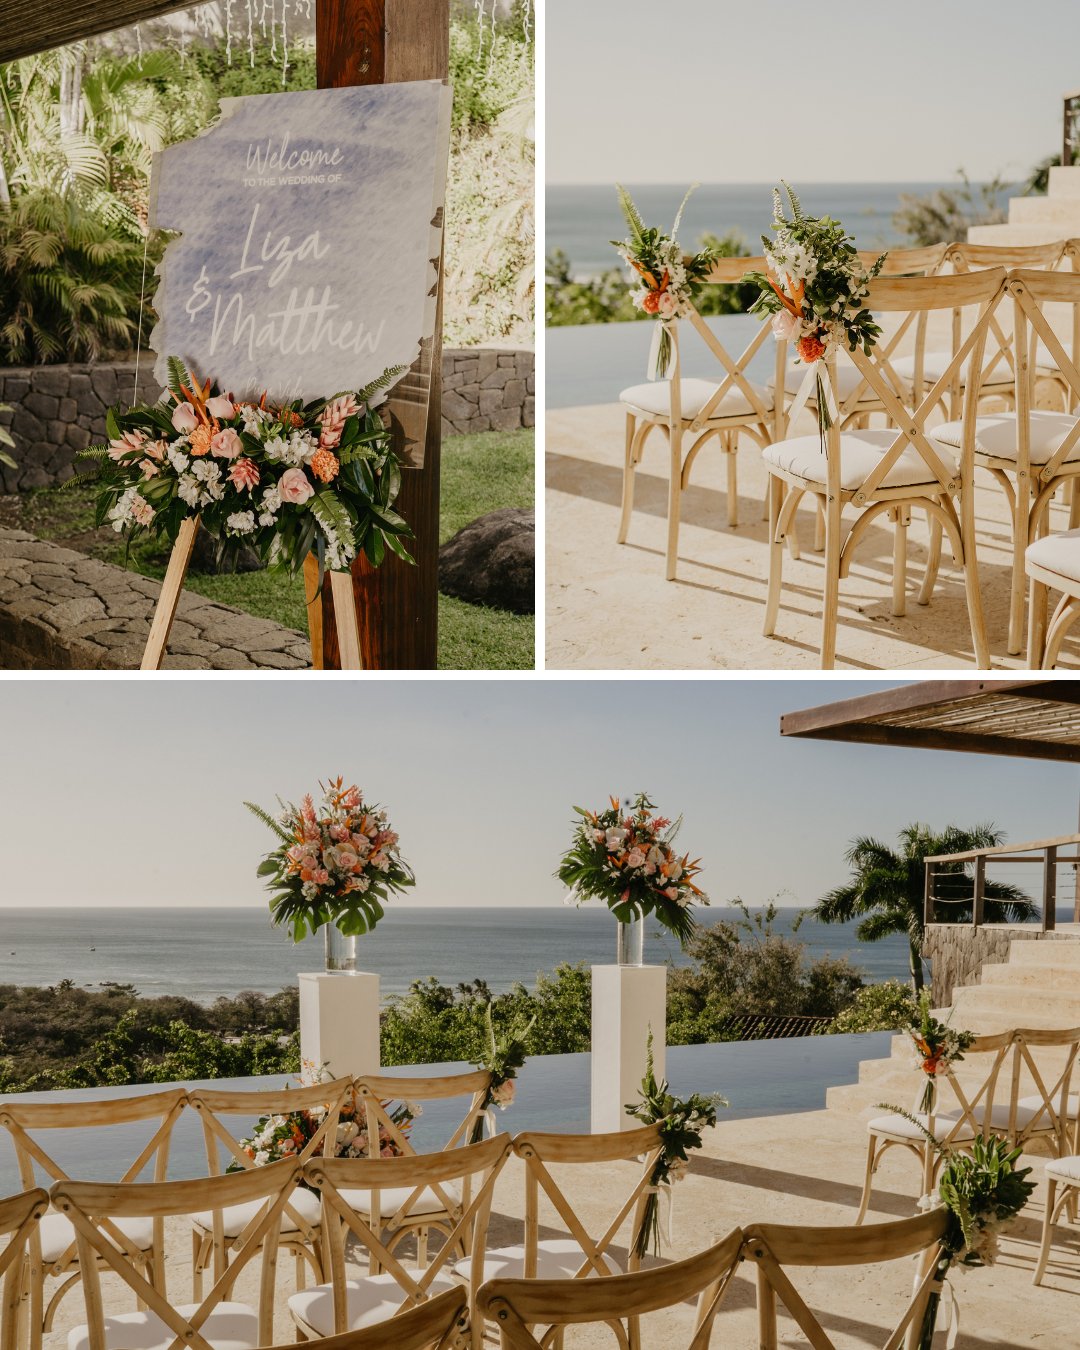 A wedding ceremony setup with a scenic ocean view. The top left image shows a sign with "Welcome Liza & Matthew" surrounded by flowers. The top right and bottom images display rows of wooden chairs adorned with floral arrangements overlooking the sea.